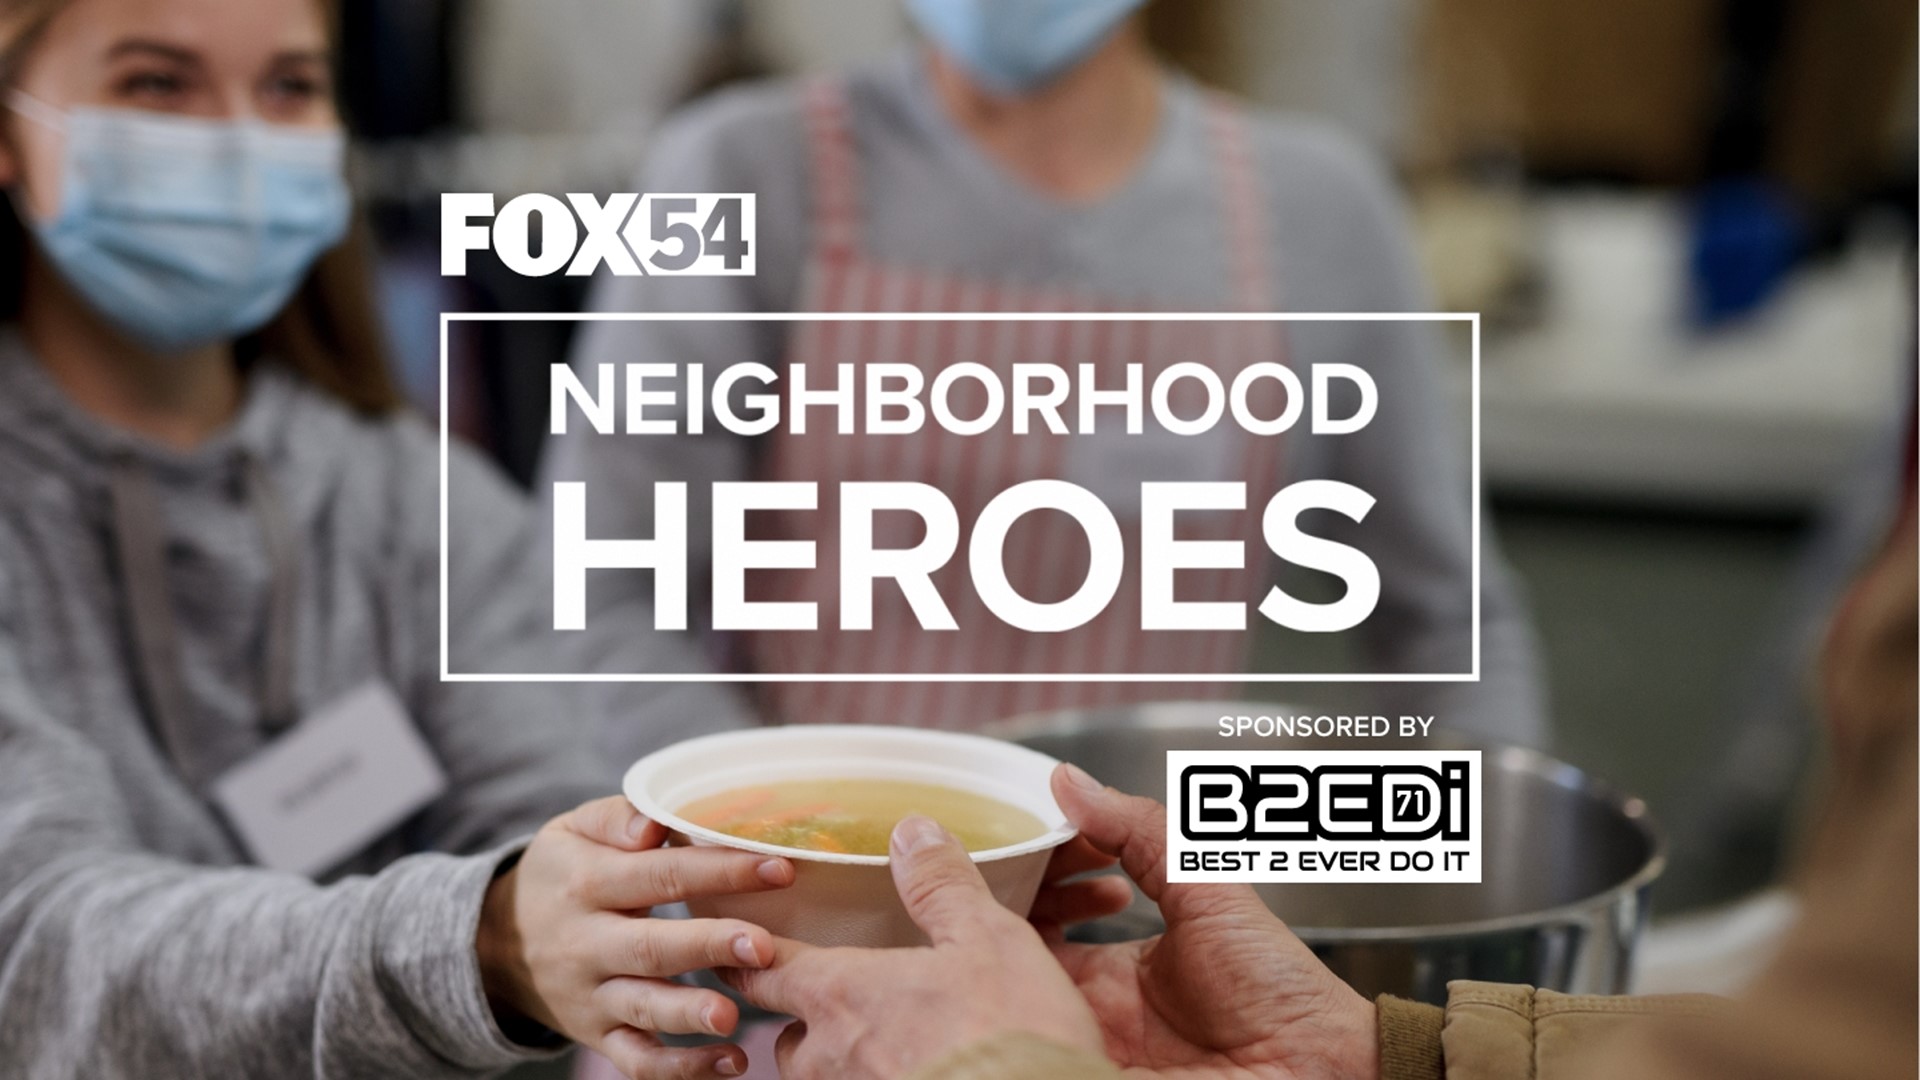 Do you know someone who goes above and beyond to serve their neighbors?